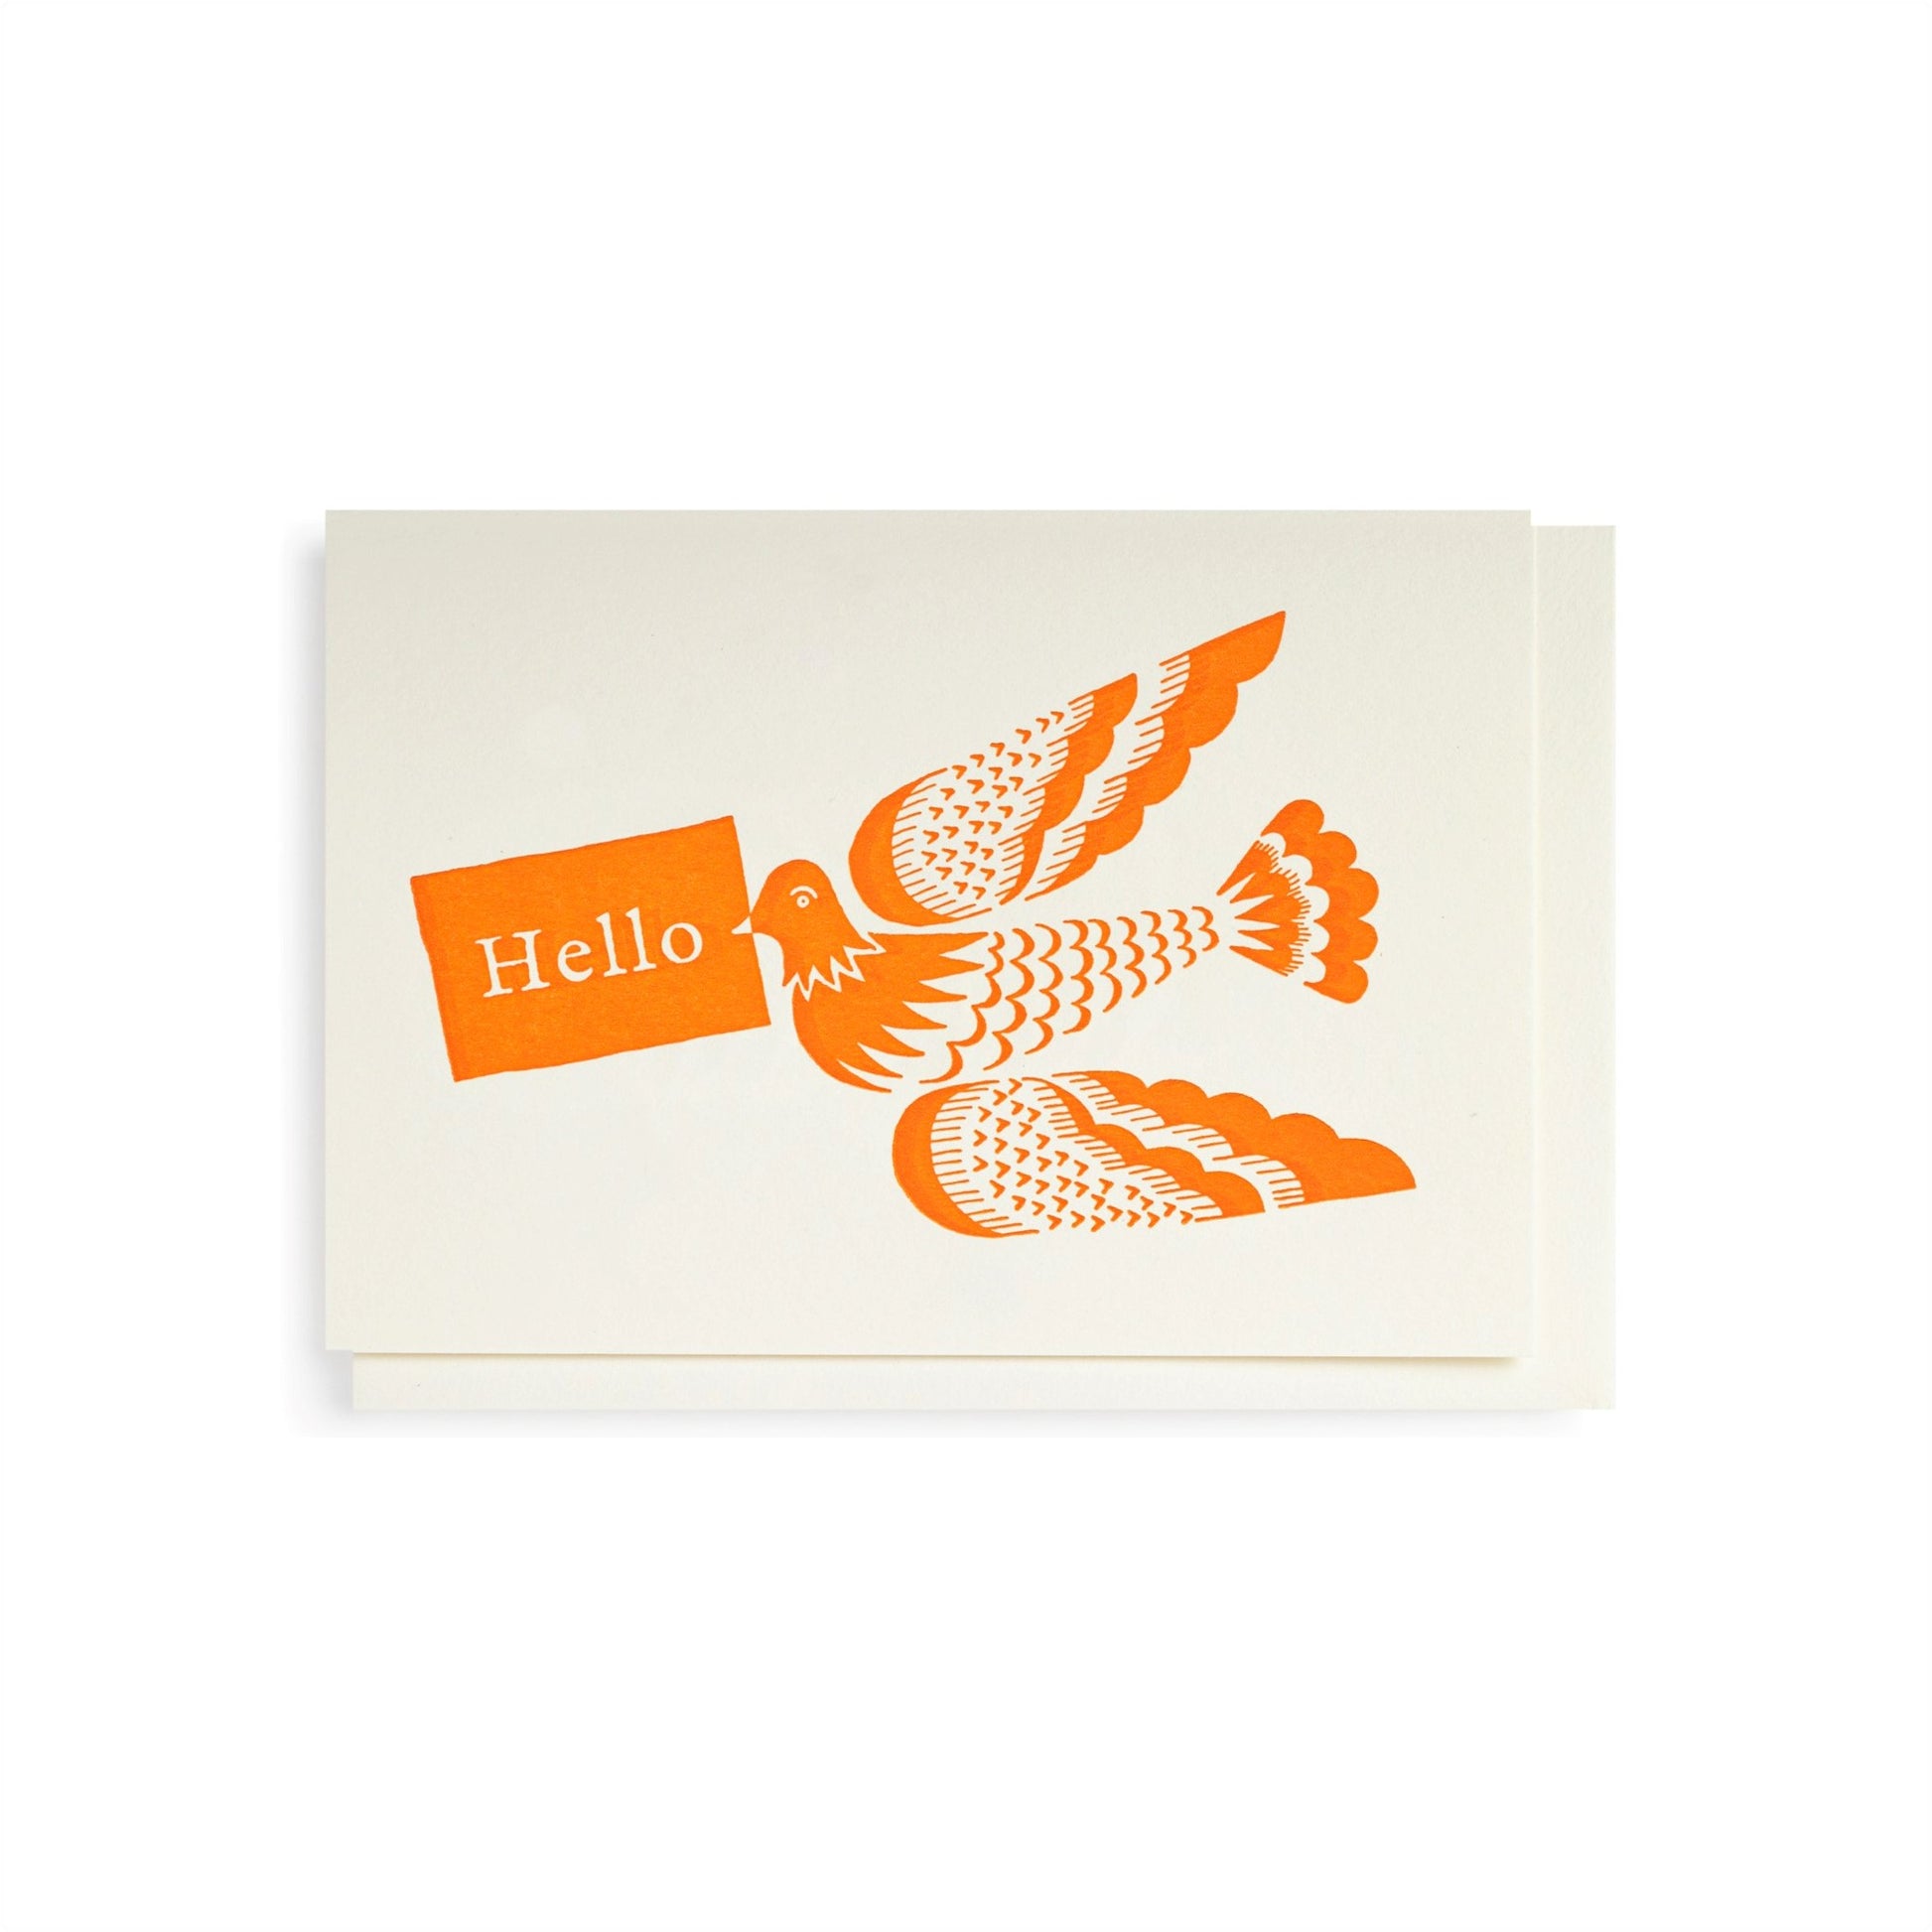 small greetings card with orange bird and hello message, by Archivist Gallery